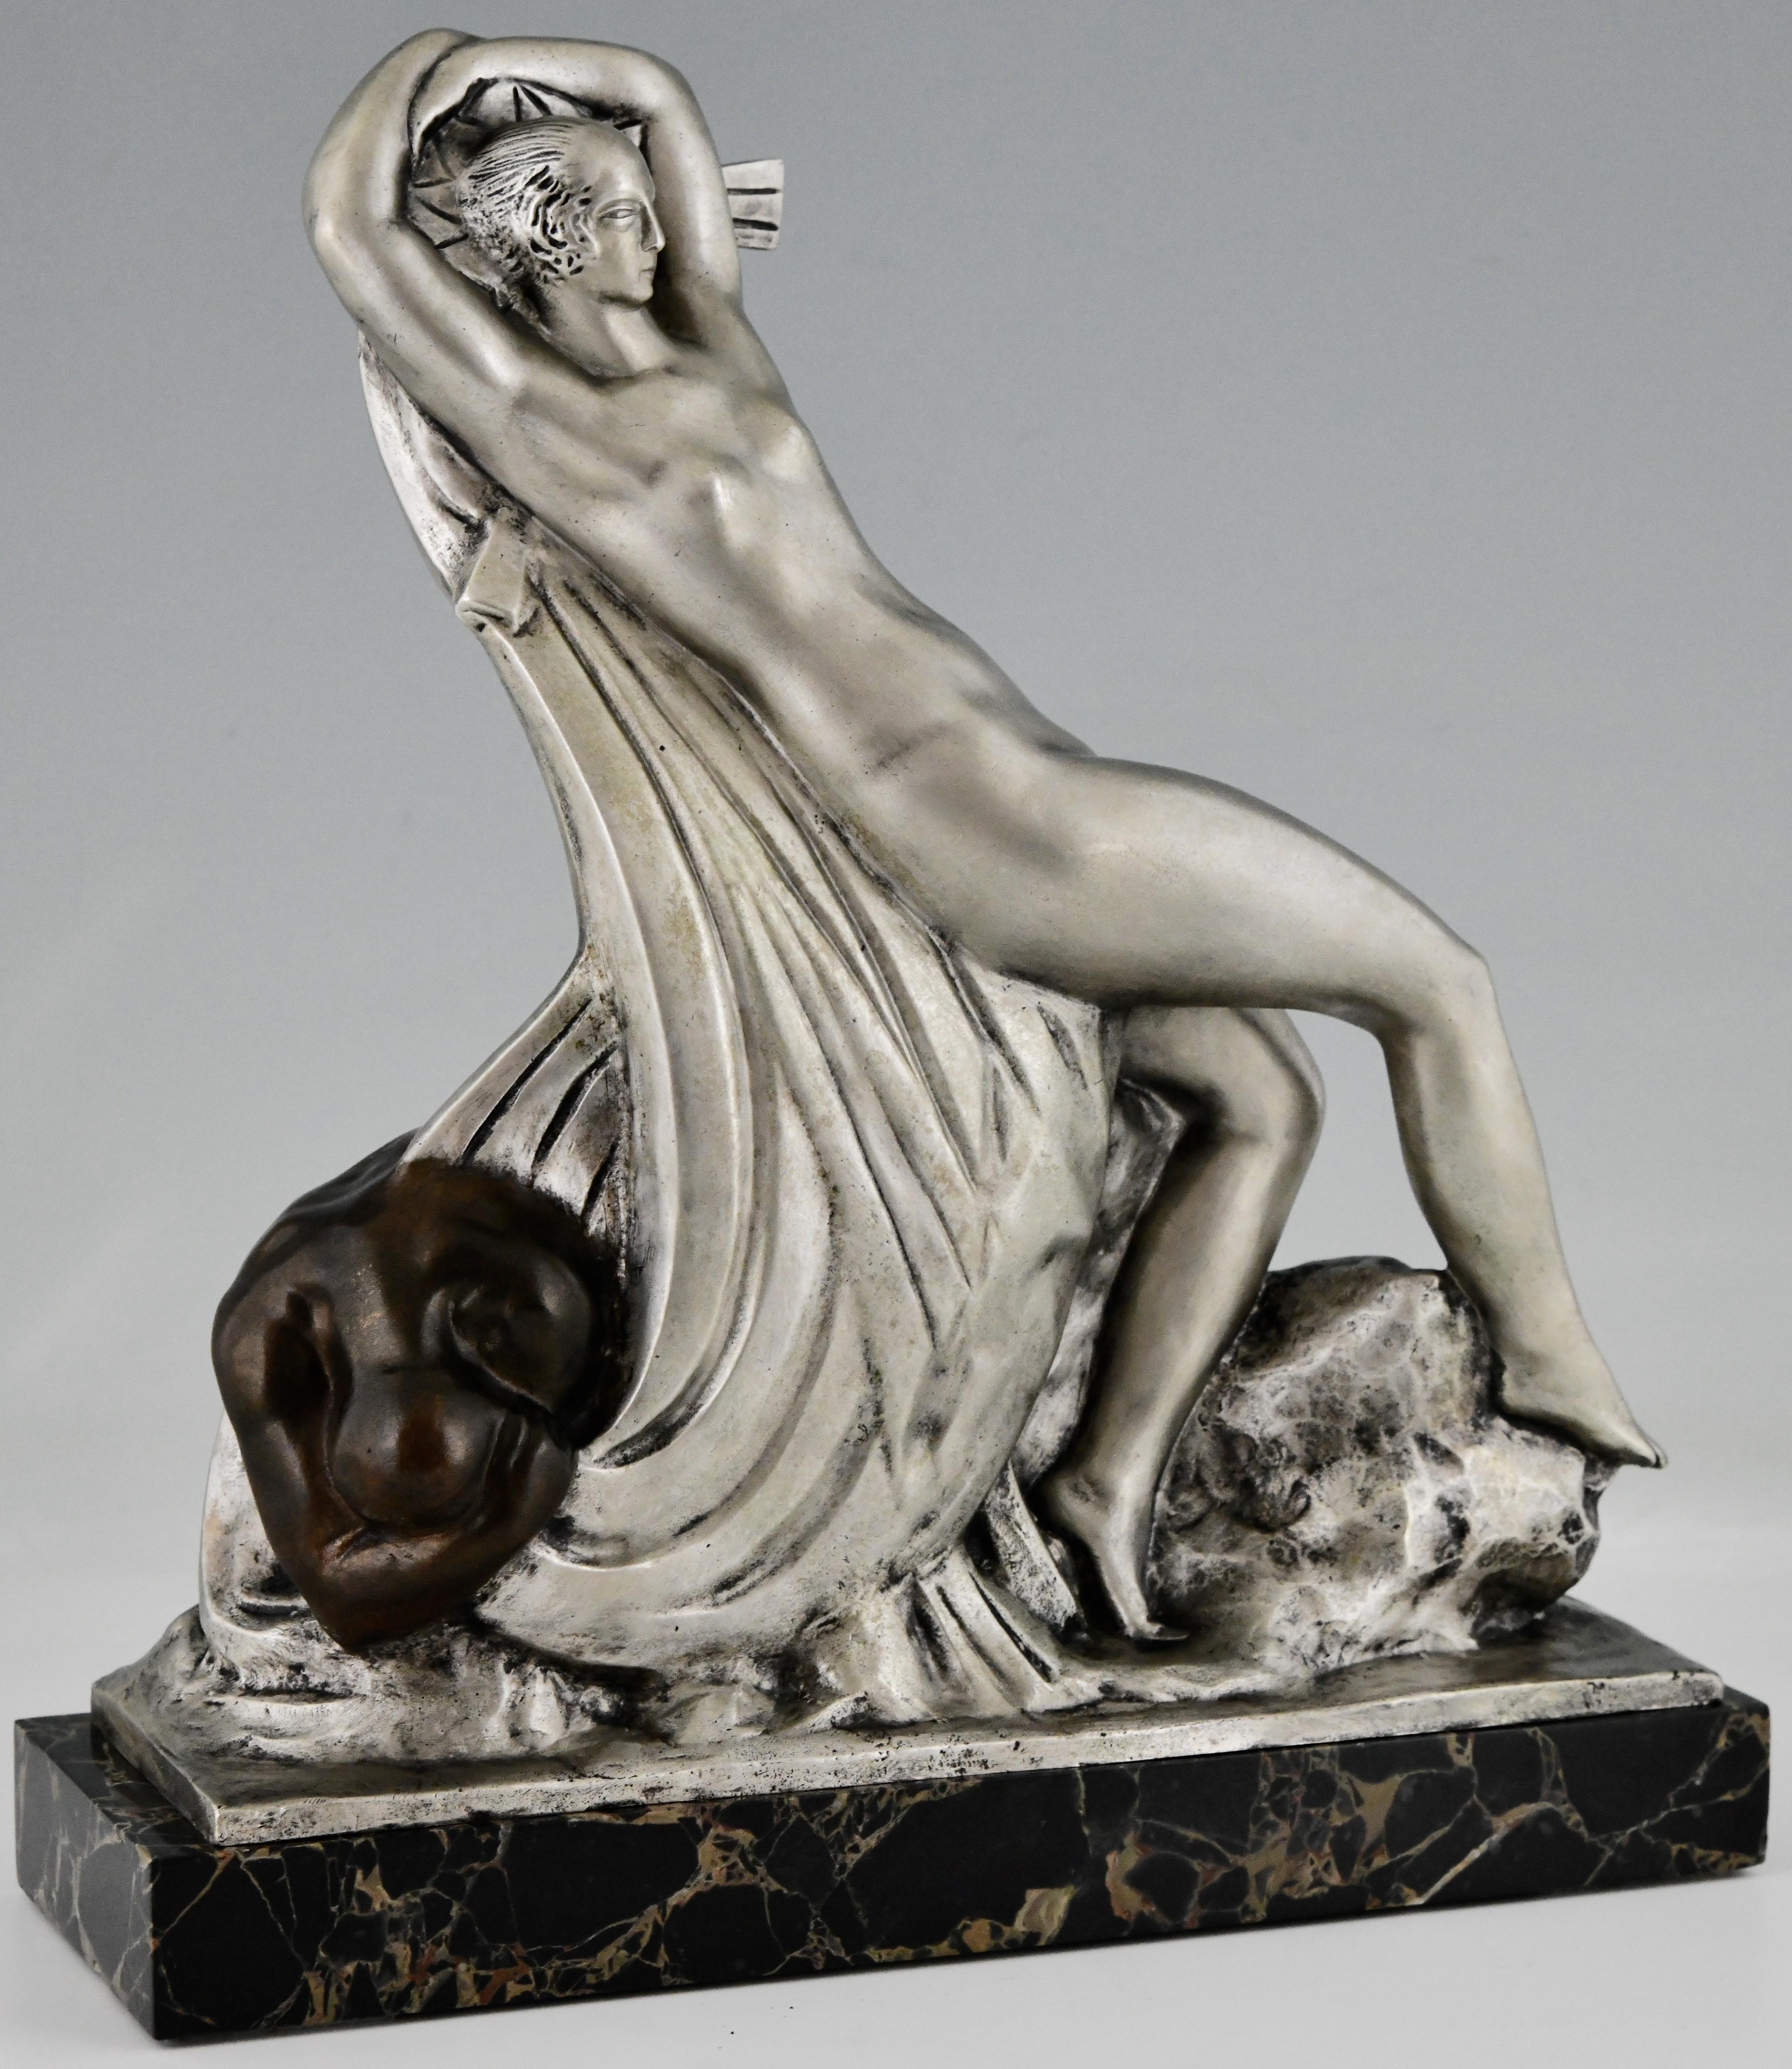 Art Deco bronze sculpture dancing nude and kneeling man by Raoul Lamourdedieu. 
Foundry Mark Alexis Rudier Fondeur Paris. Edition Pomone, the design studio lead by Paul Follot. 
Bronze with silver and brown patina on Portor marble base. 
France